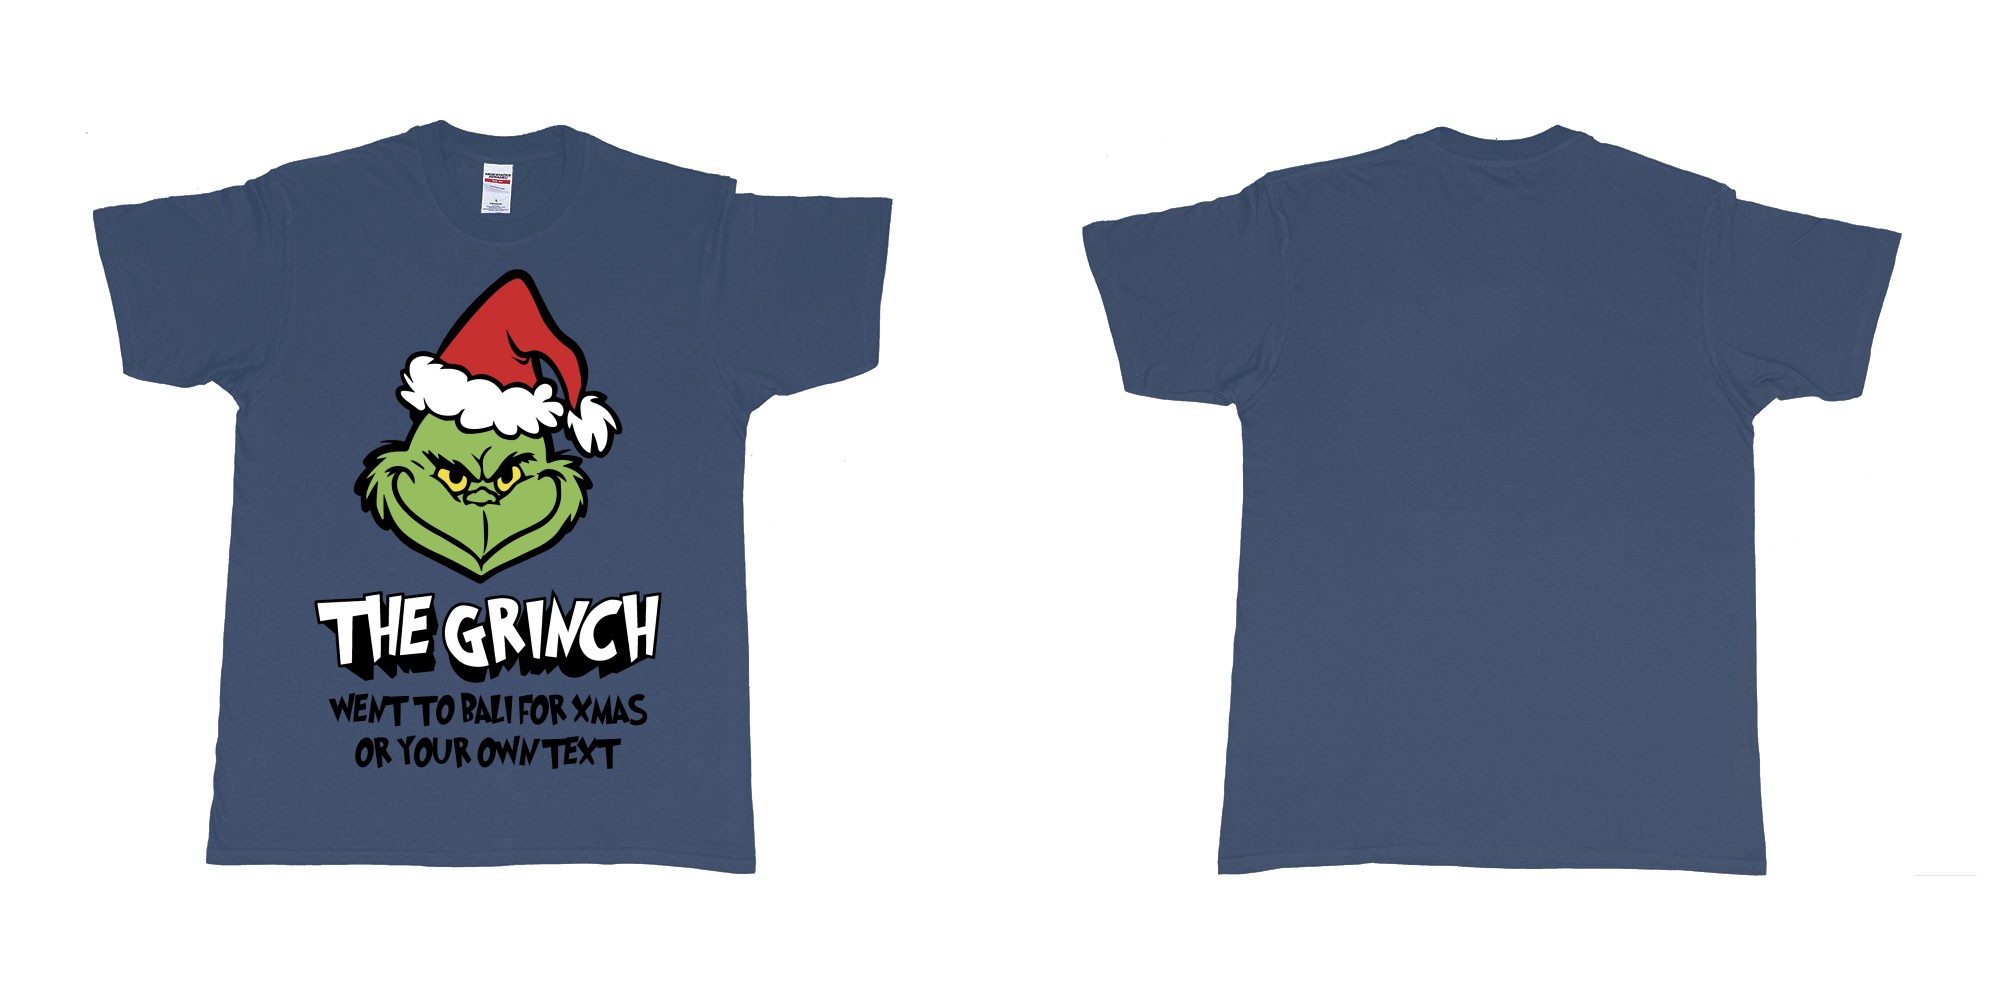 Custom tshirt design the grinch went to bali for xmas tshirt in fabric color navy choice your own text made in Bali by The Pirate Way